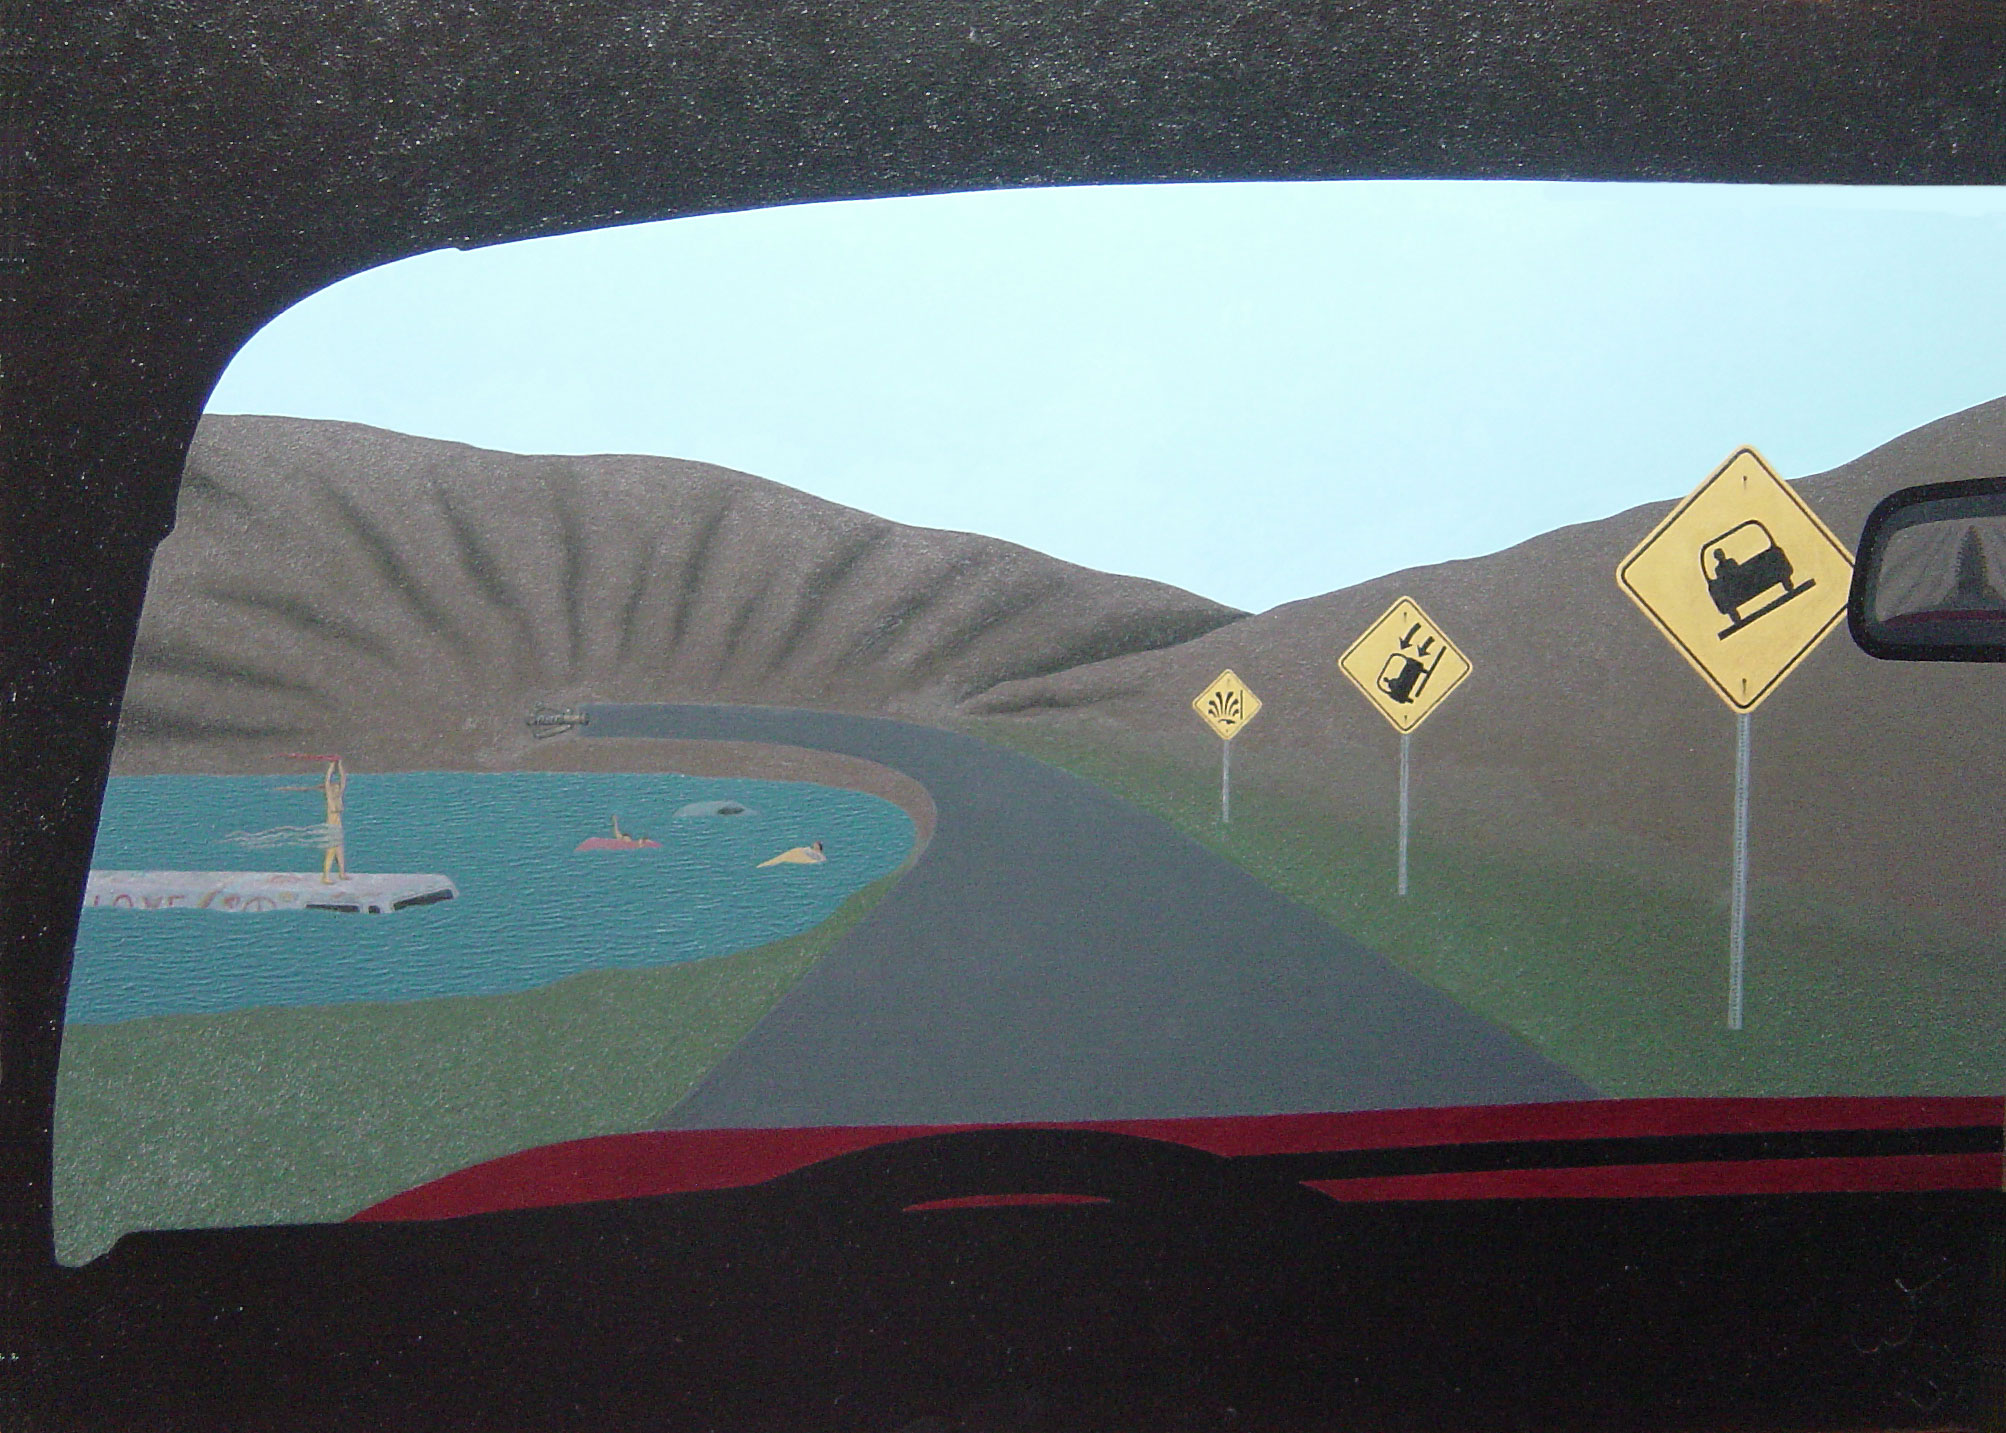 view from the driver's seat of a car, showing a group of playful but troublesome volcanos